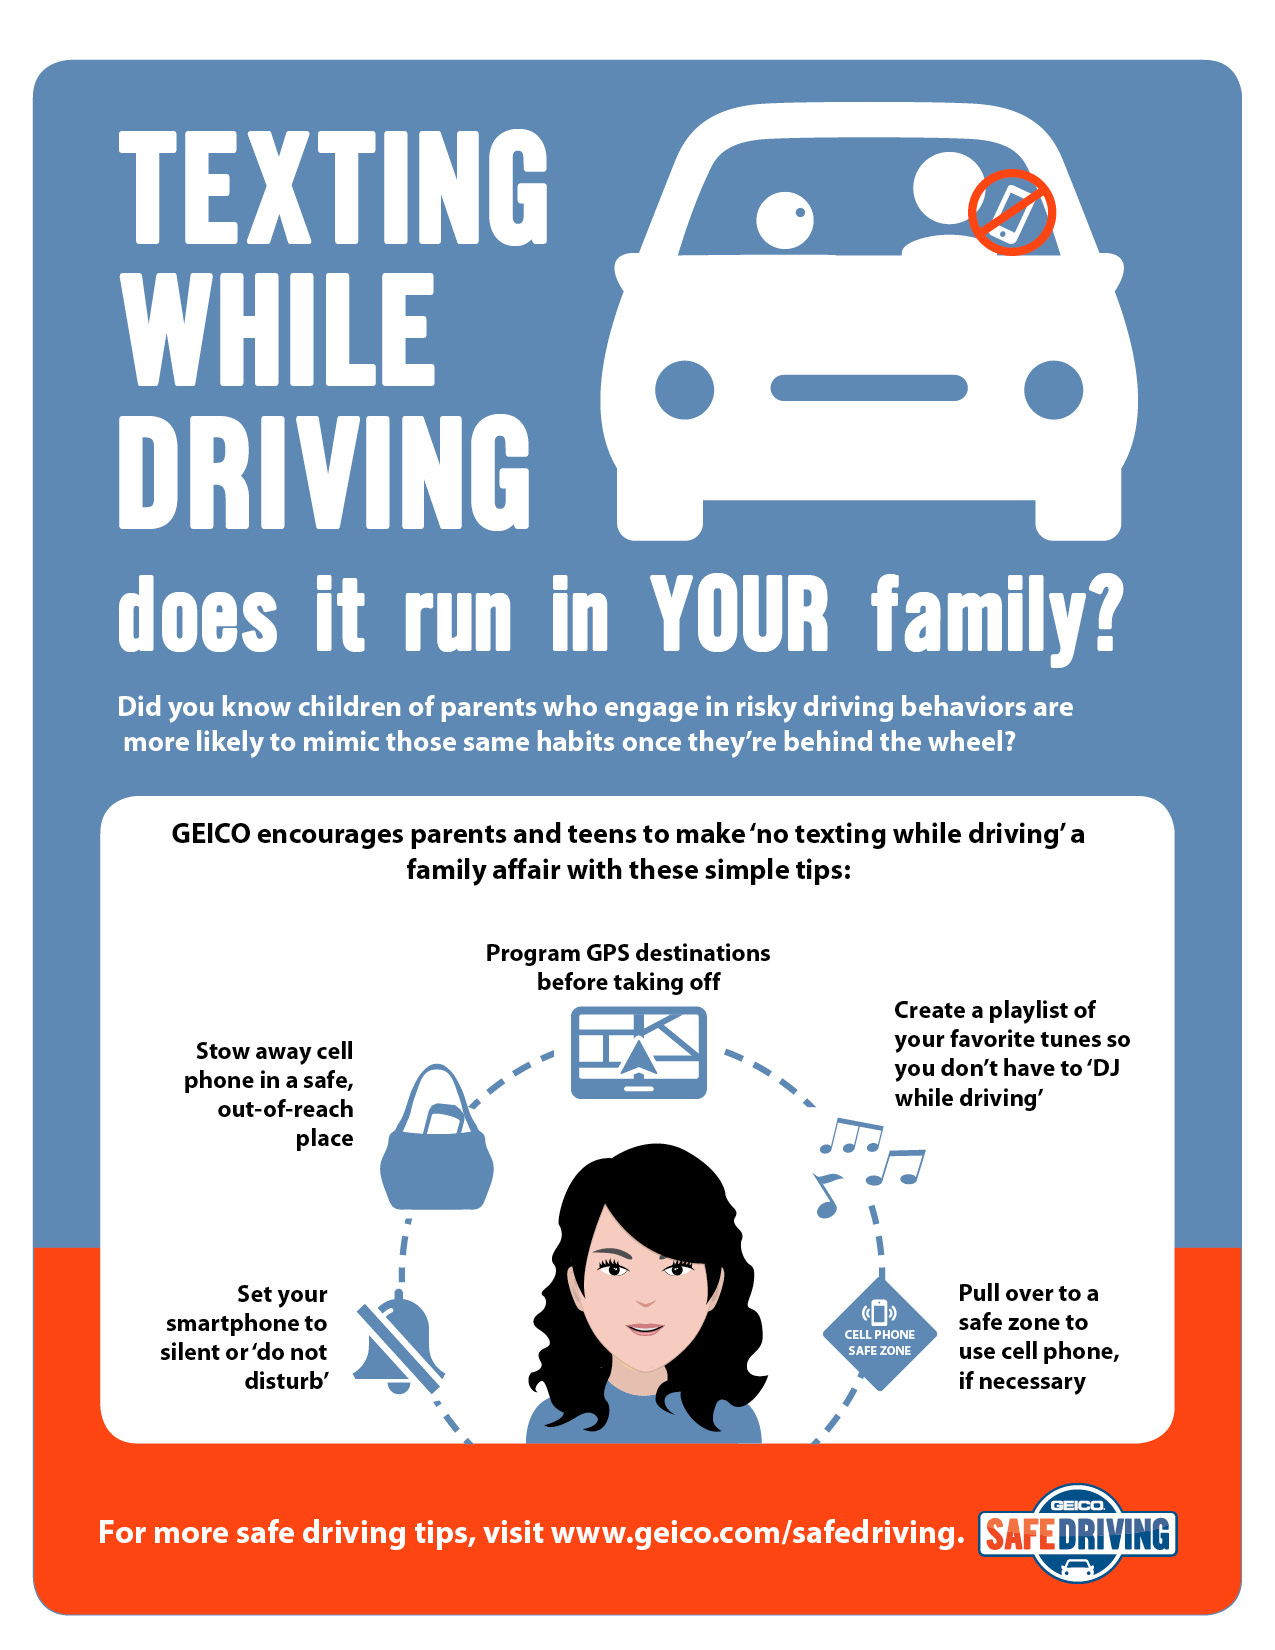 GEICO Tip: Don't Let Texting and Driving Run in Your Family | Business Wire